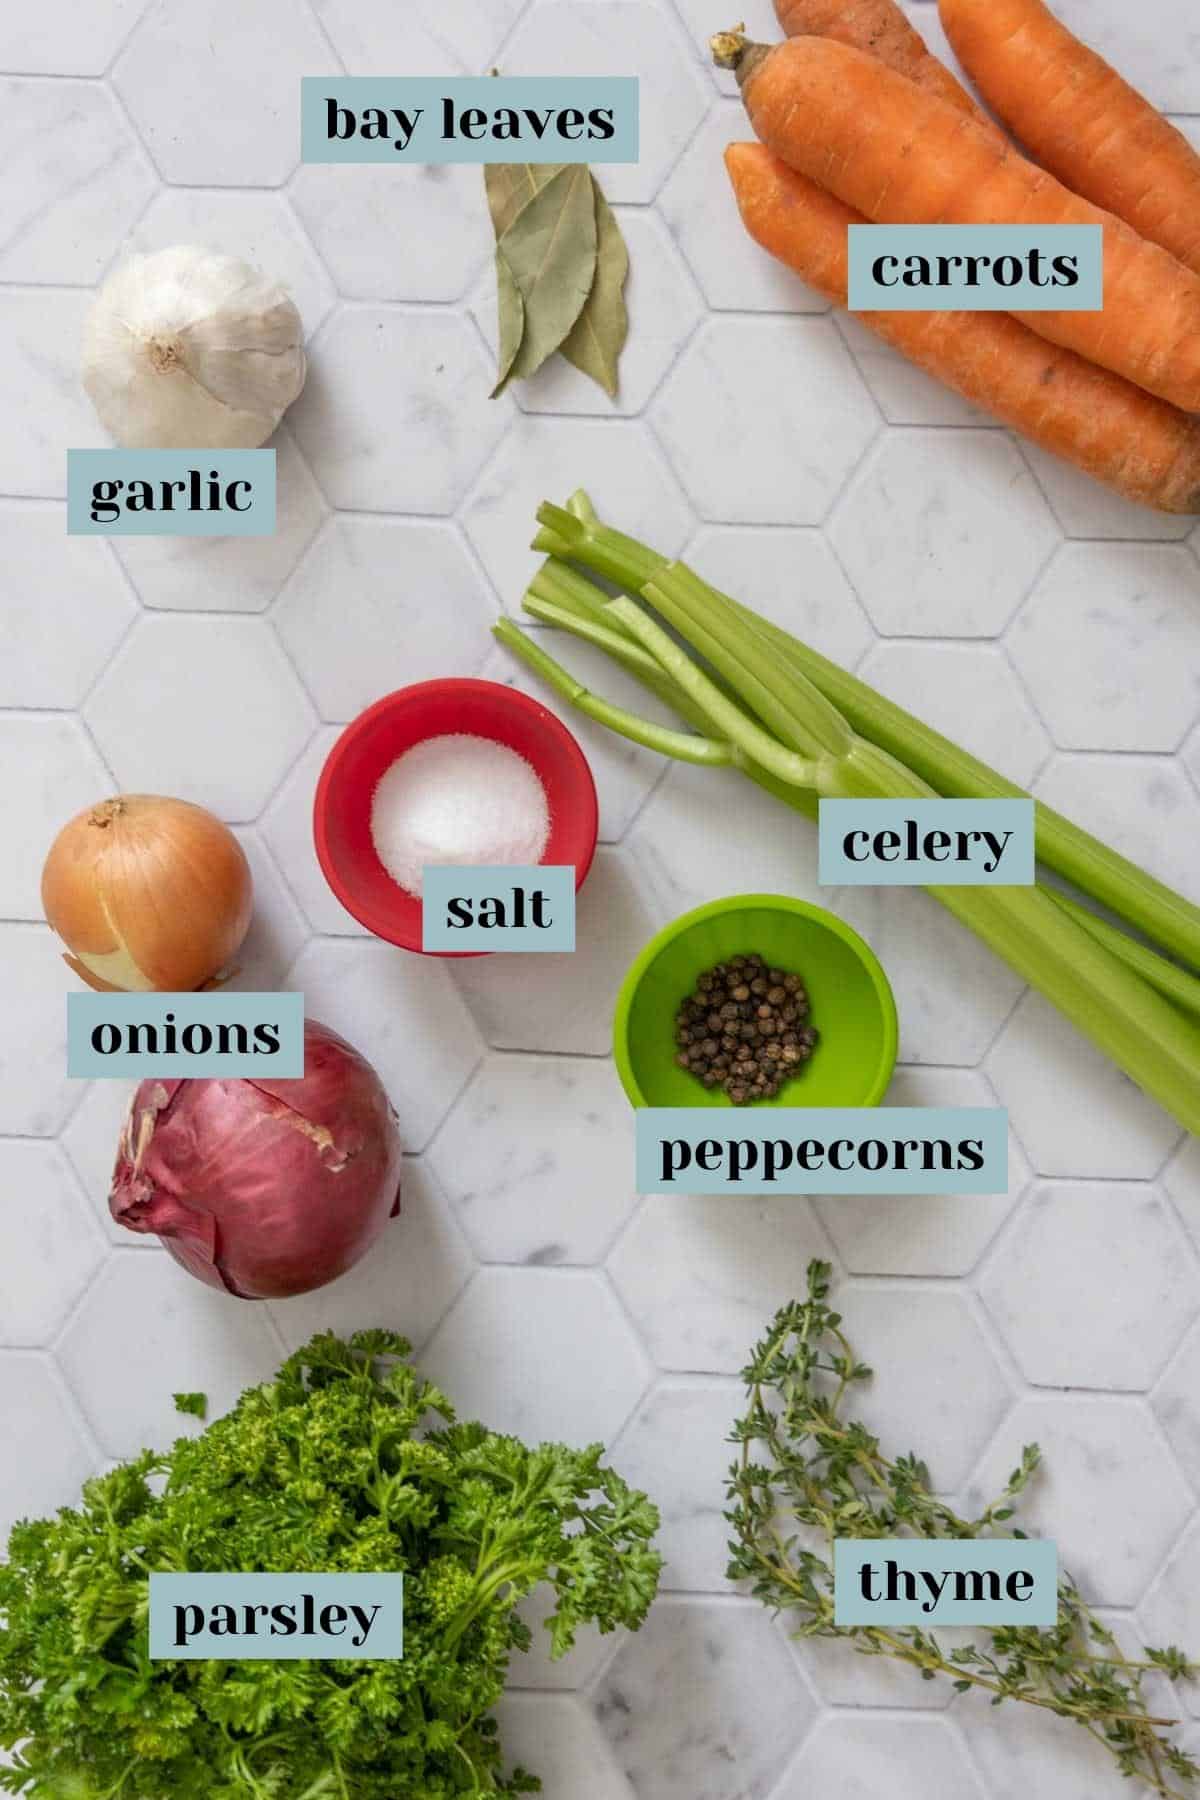 Ingredients for vegetable stock on a tile surface with labels.